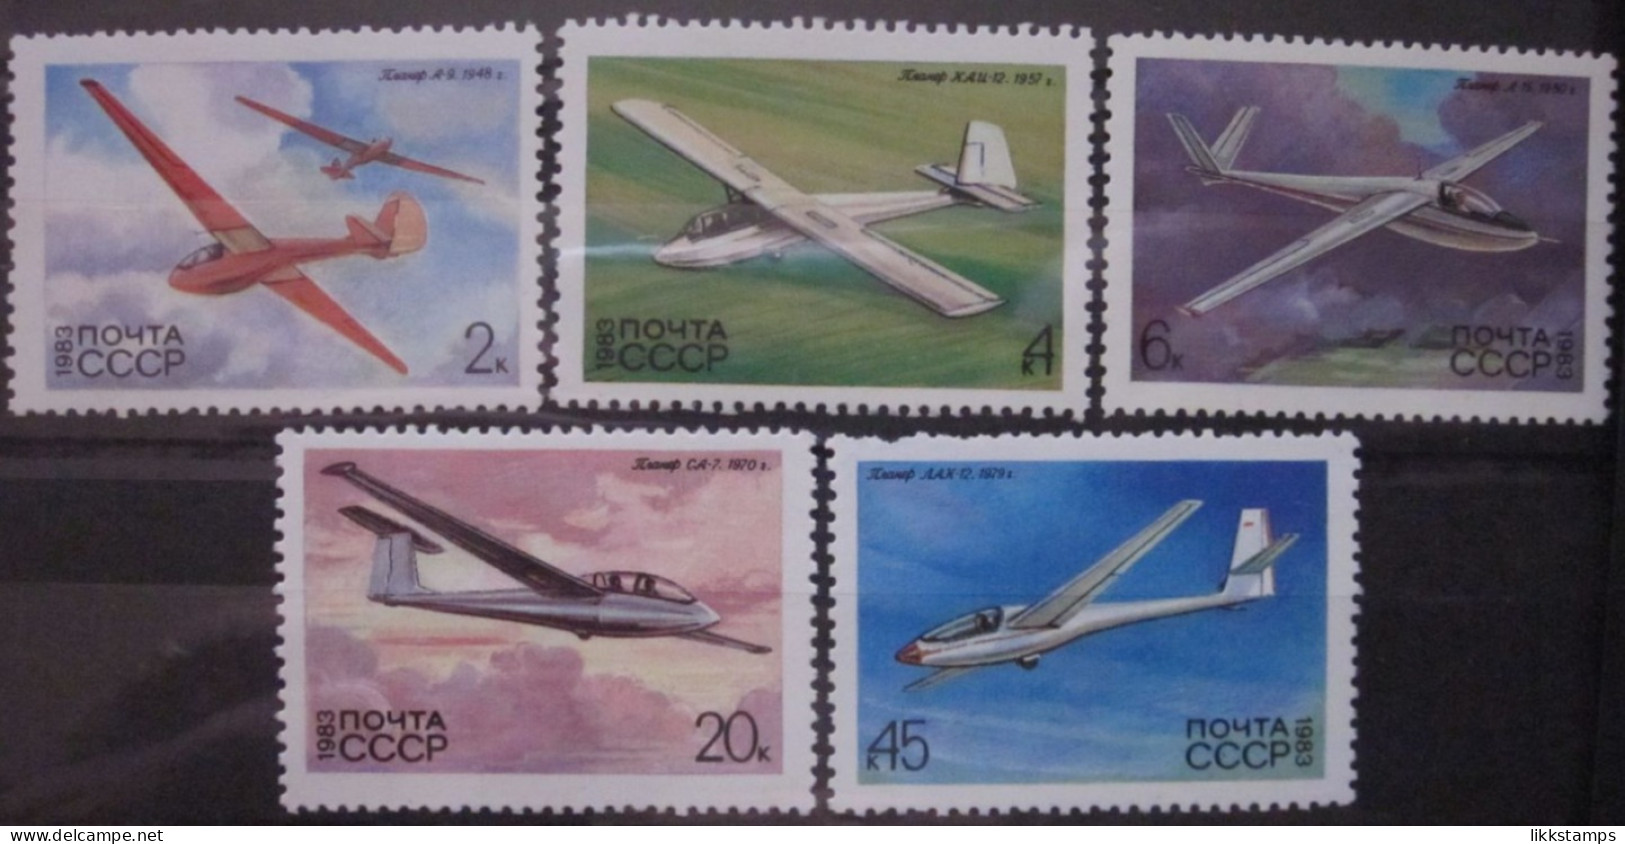 RUSSIA ~ 1983 ~ S.G. NUMBERS 5301 - 5305, ~ GLIDERS. ~ MNH #03633 - Unused Stamps